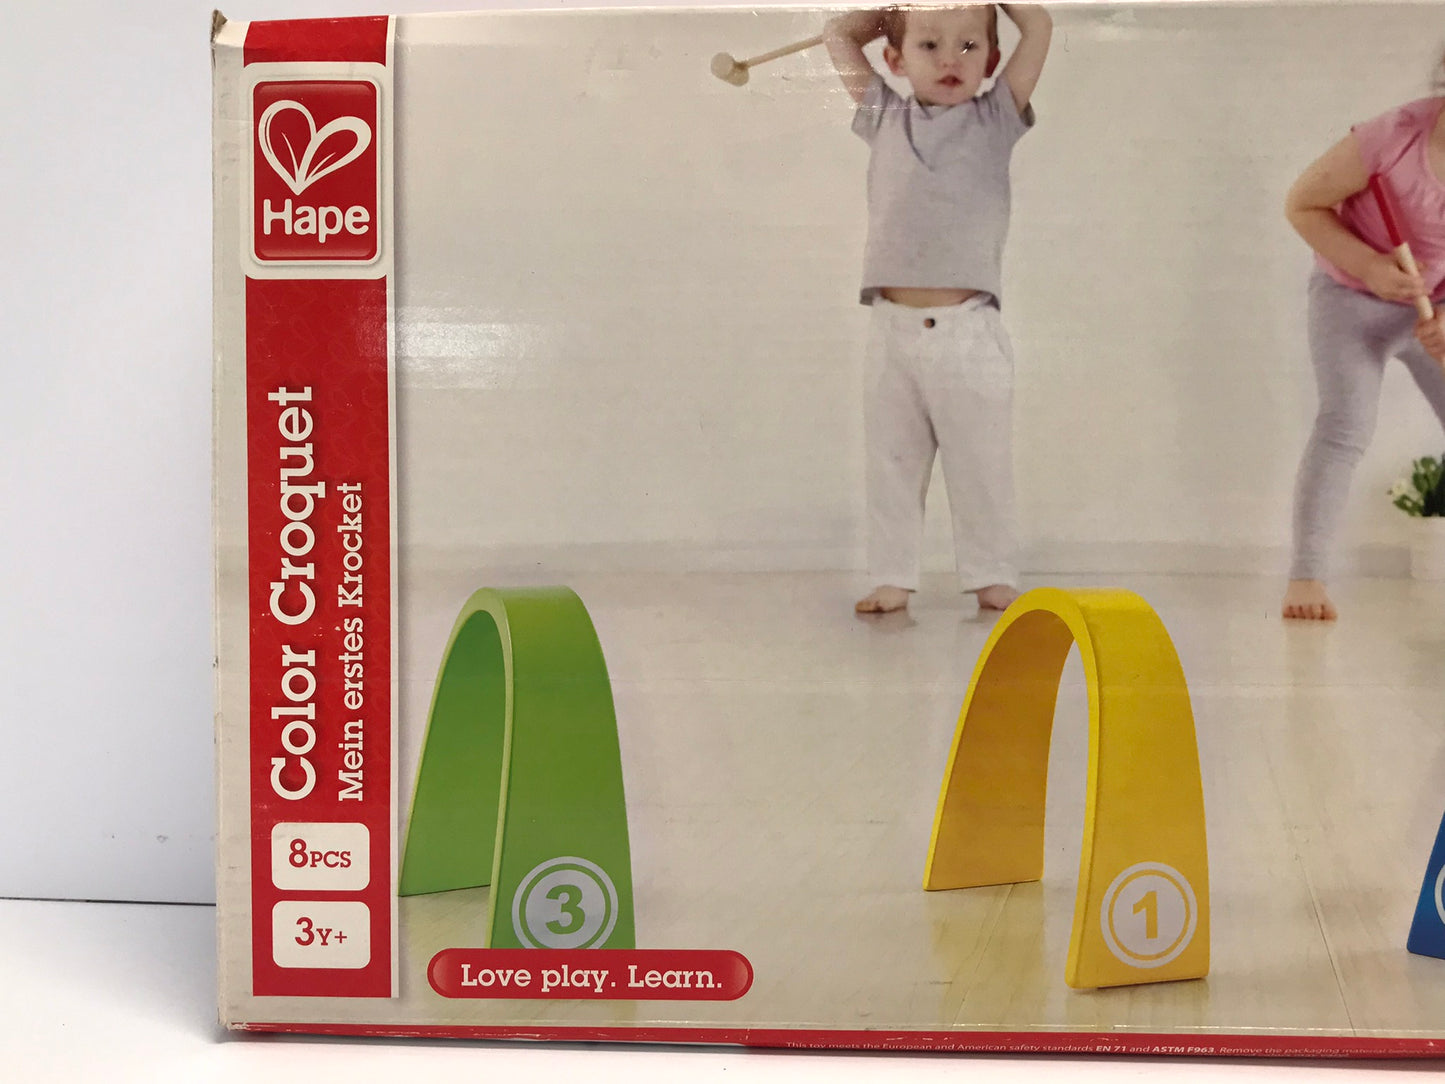 Hape Wooden Kids Outdoor Backyard or Indoor Colorful Croquet Set for 2 Players New In Box